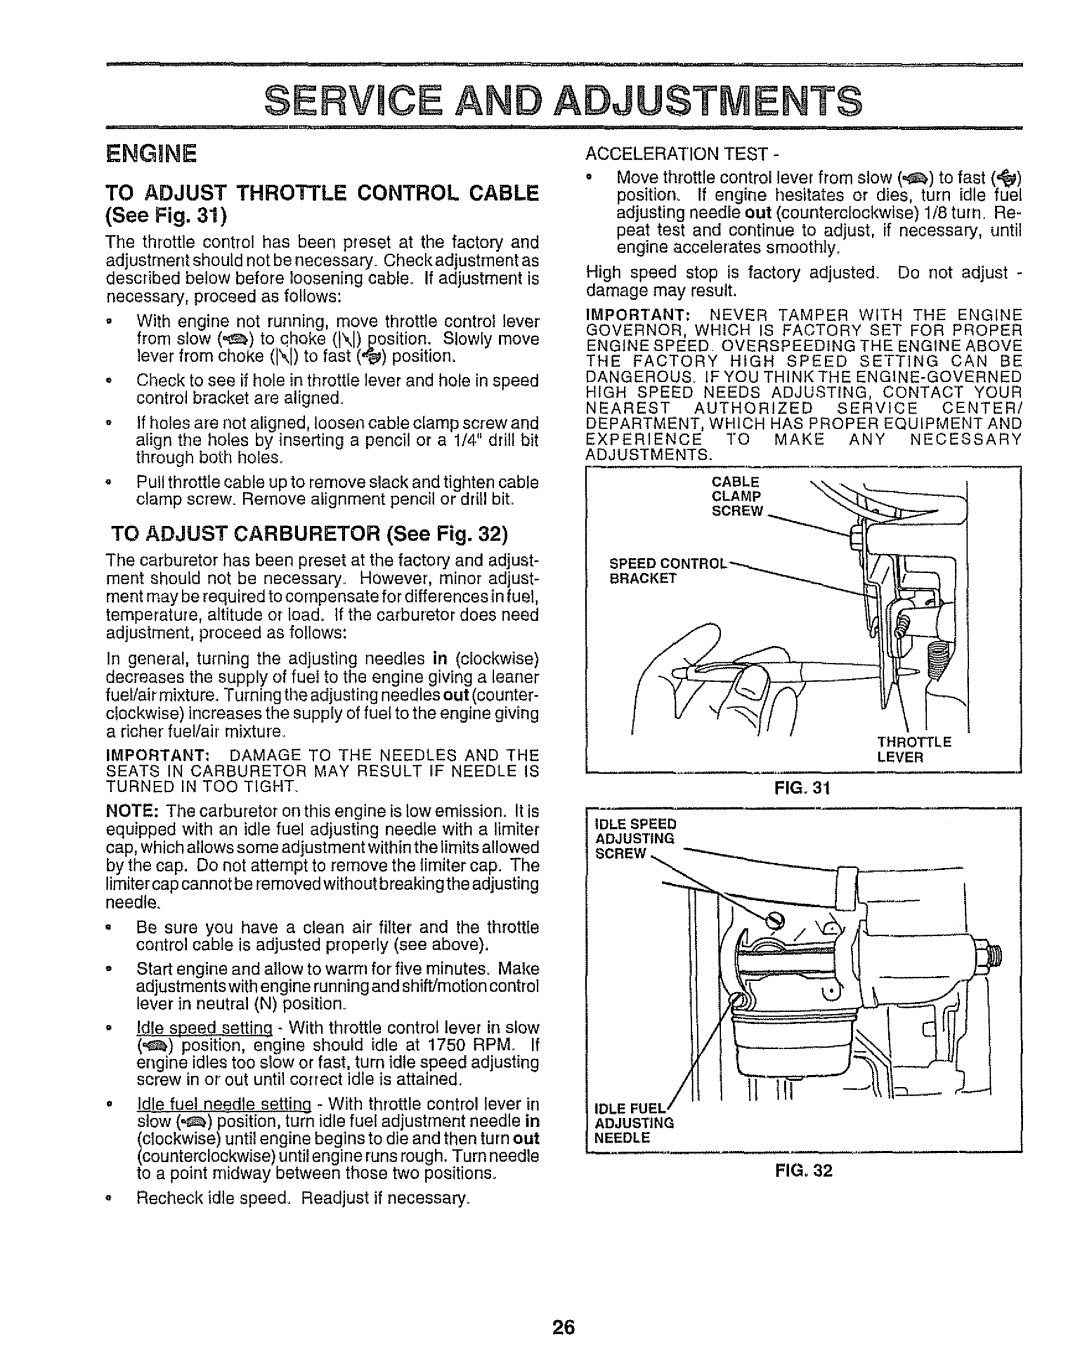 Sears 917.25958 manual Rv Ce And Adjustments, Screw, To Adjust Throttle Control Cable, Engine, See Fig 